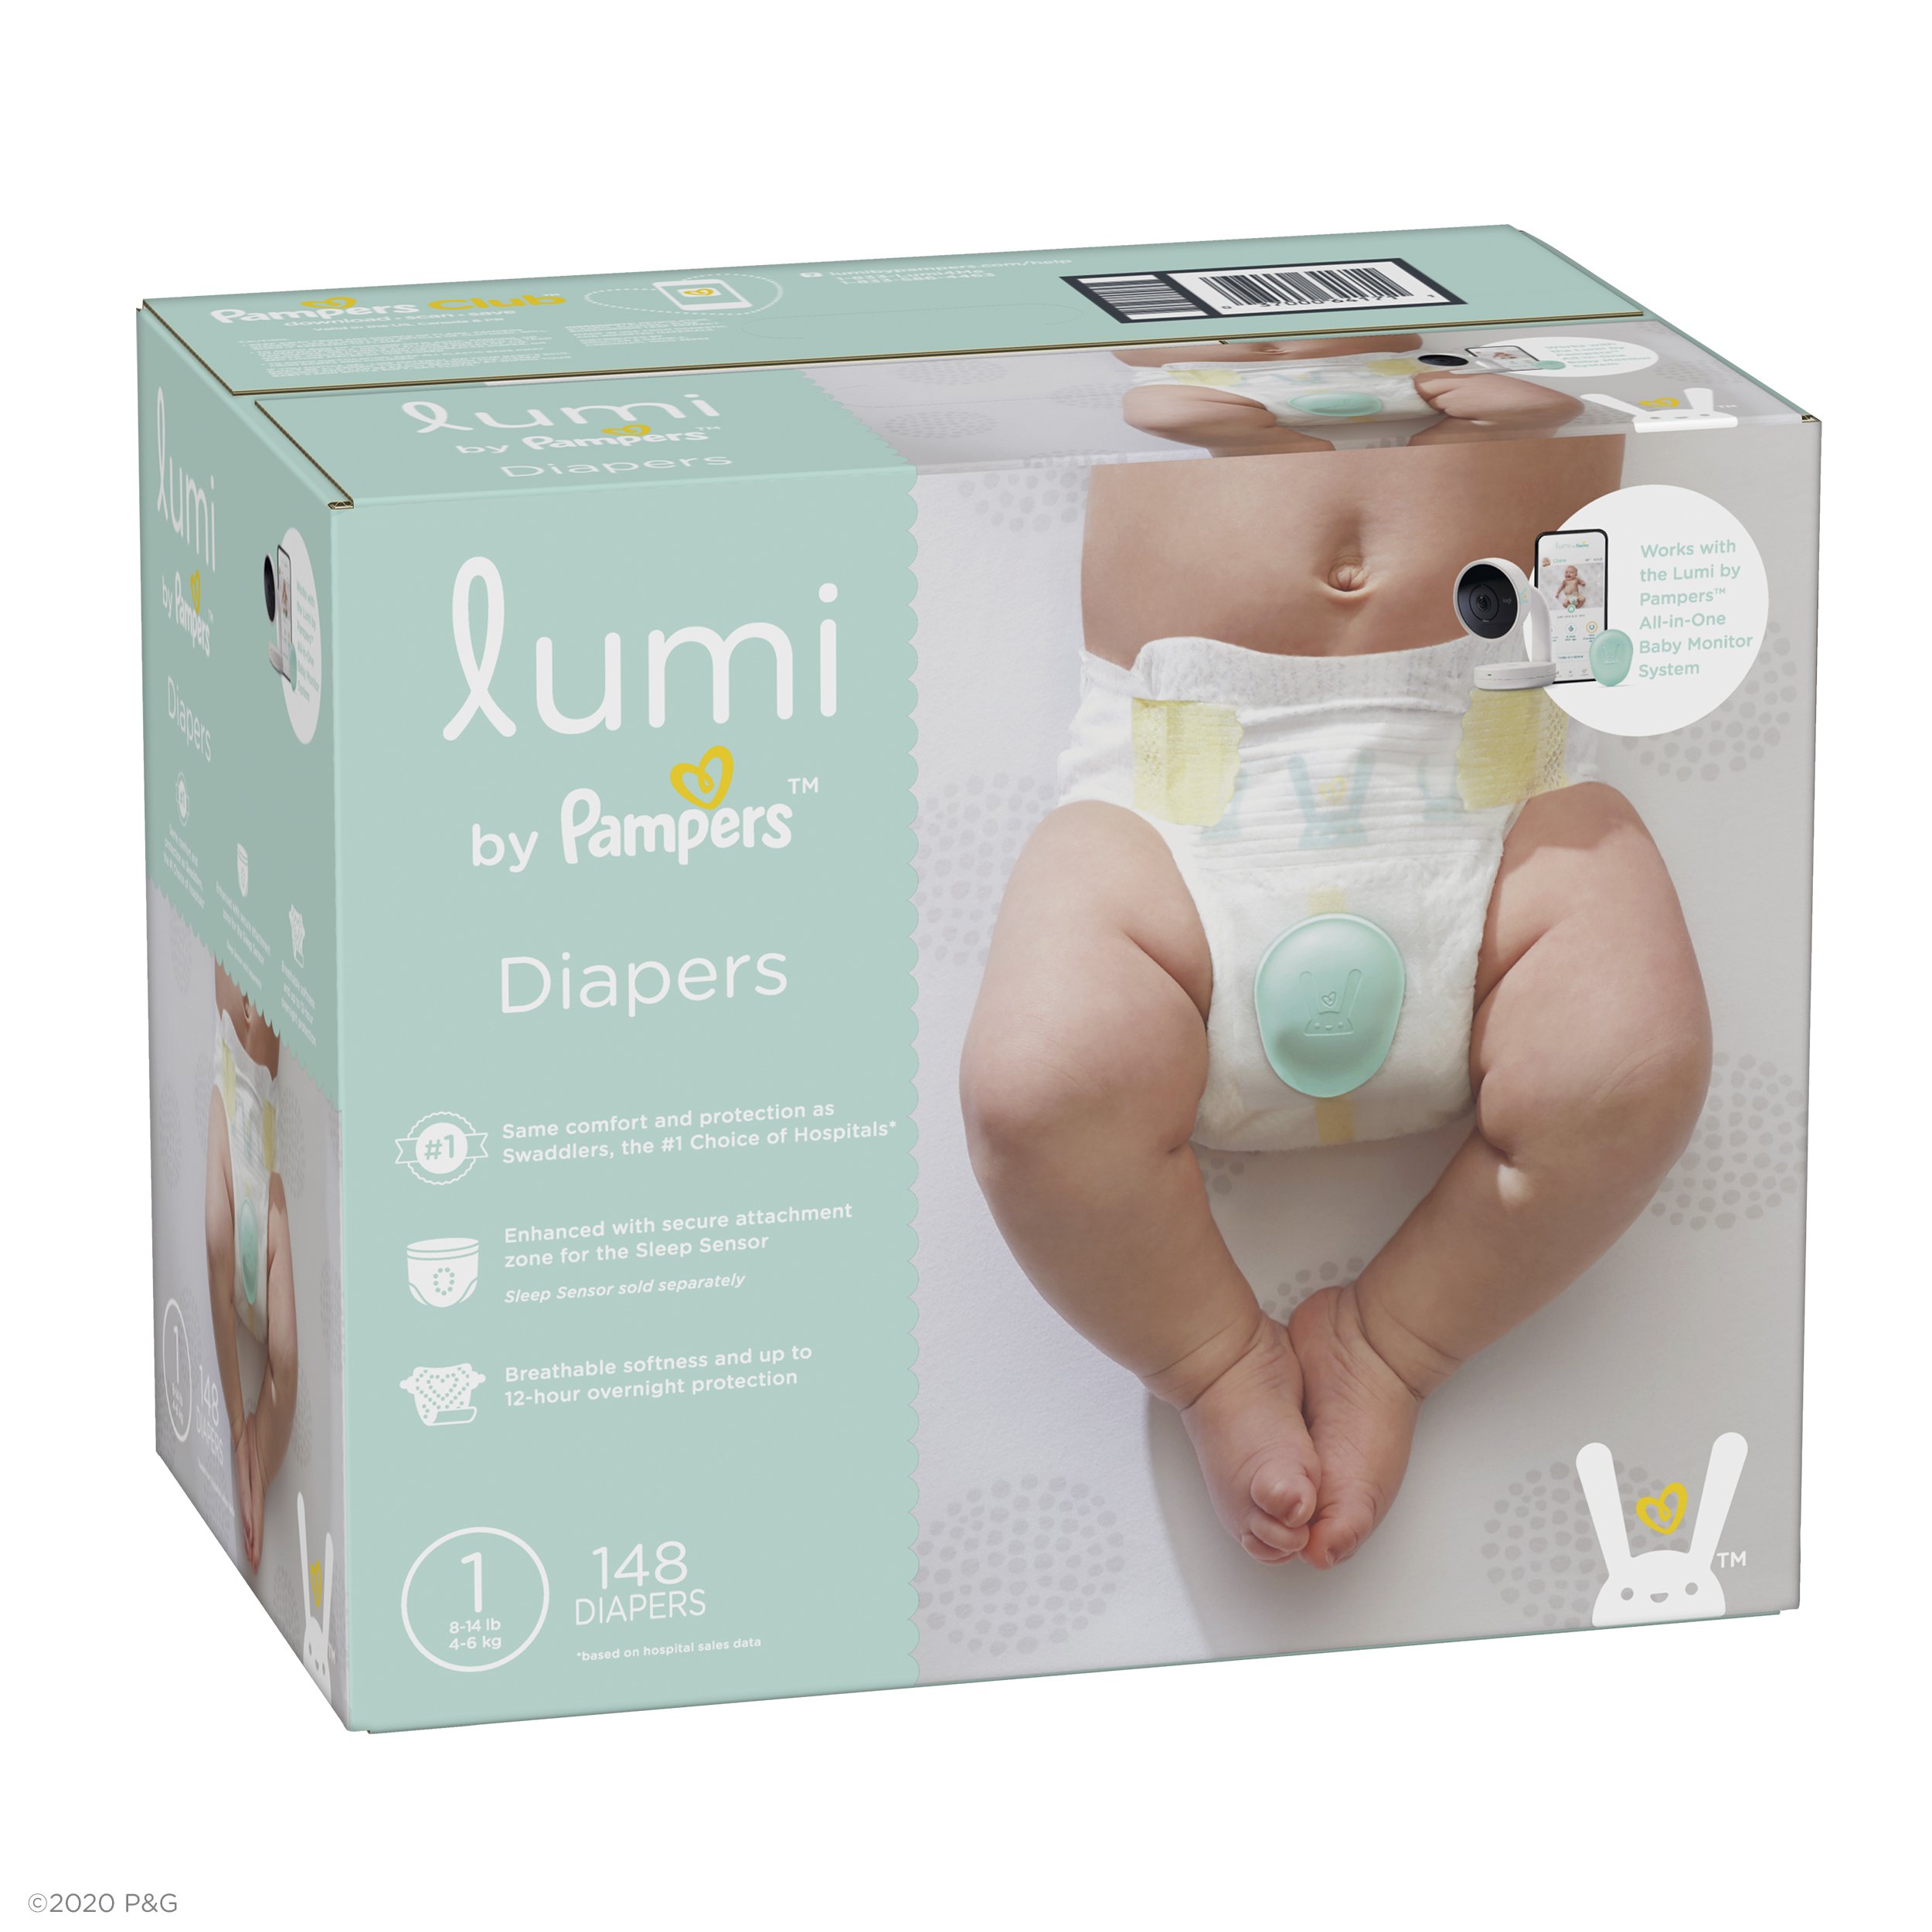 Lumi by Pampers Newborn Diapers Size 1 148 Count